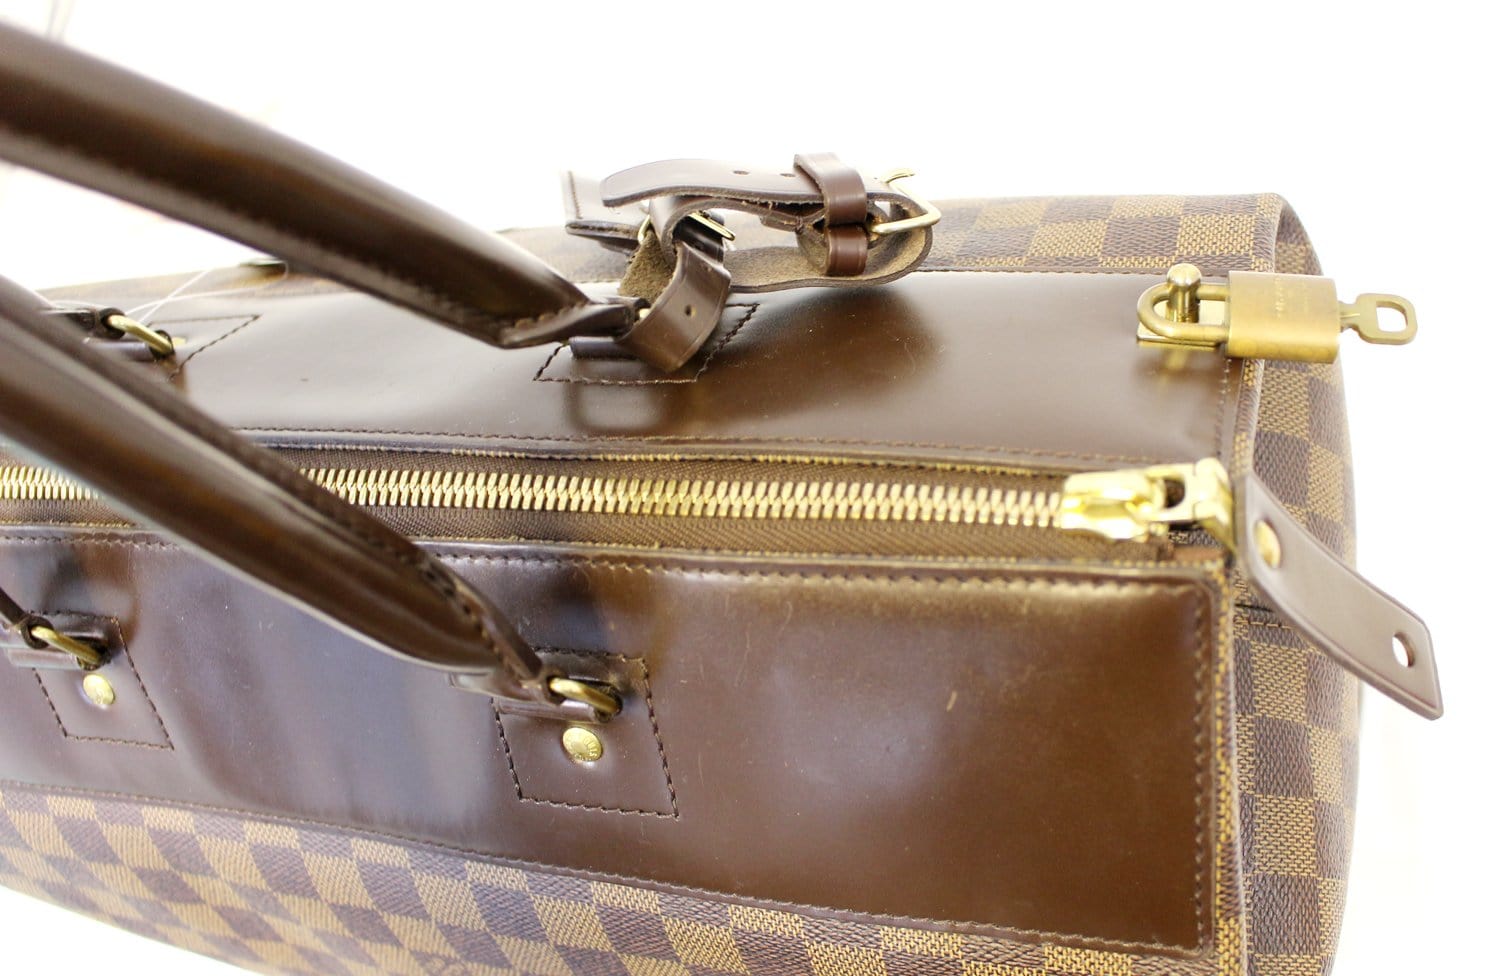 Louis Vuitton Greenwich Gm Damier Ebene Travel Bag (pre-owned), Luggage, Clothing & Accessories